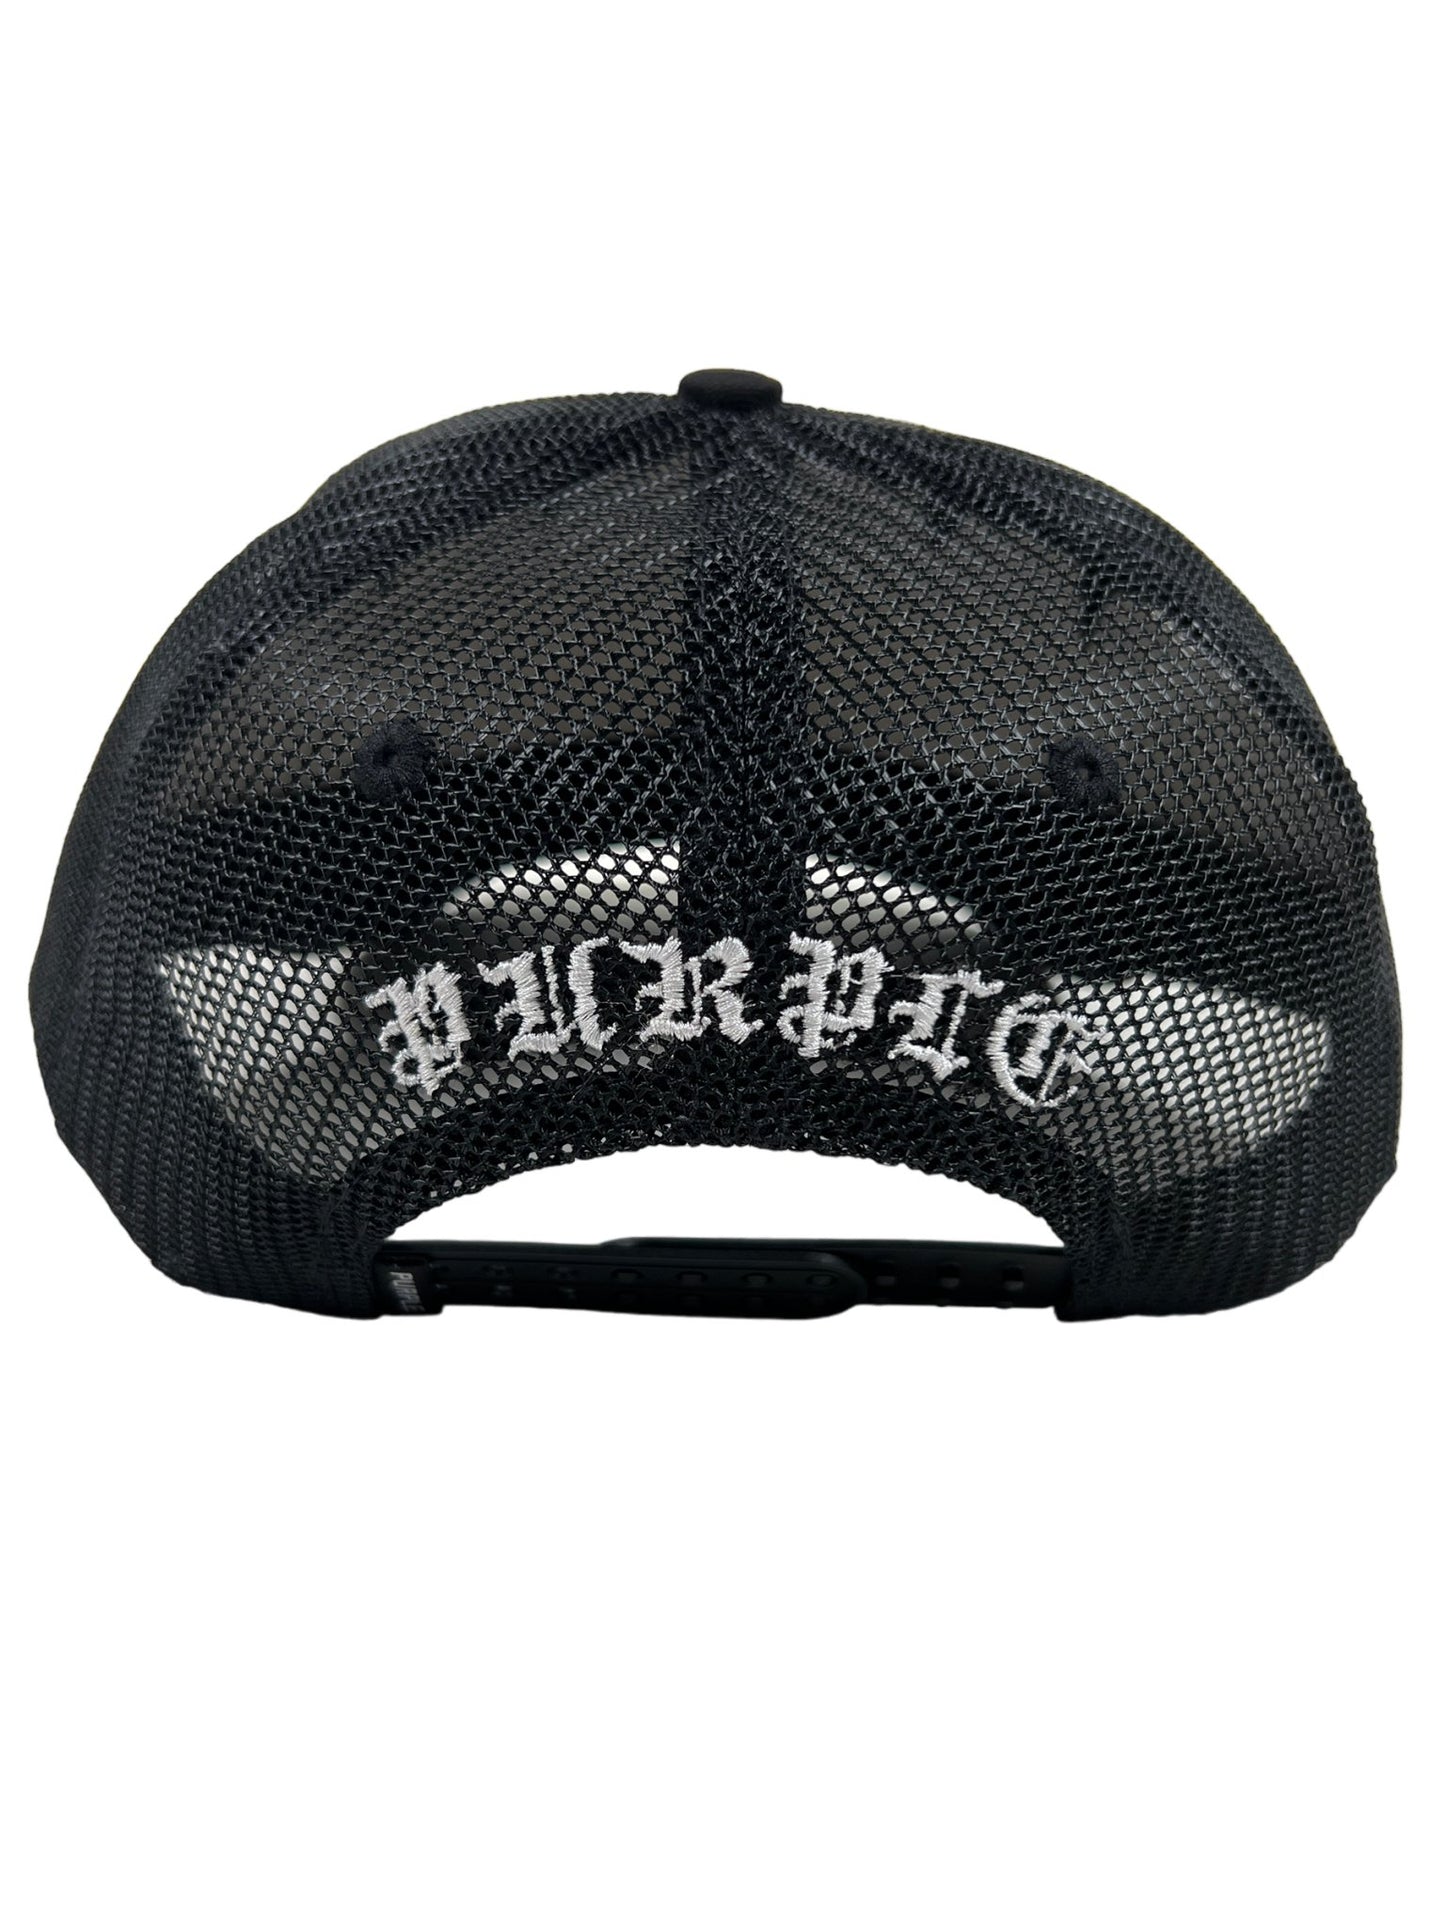 Rear view of a PURPLE BRAND A2054-TTGB cotton twill trucker hat in black with the word "#crptc" embroidered in white above the snapback closure.